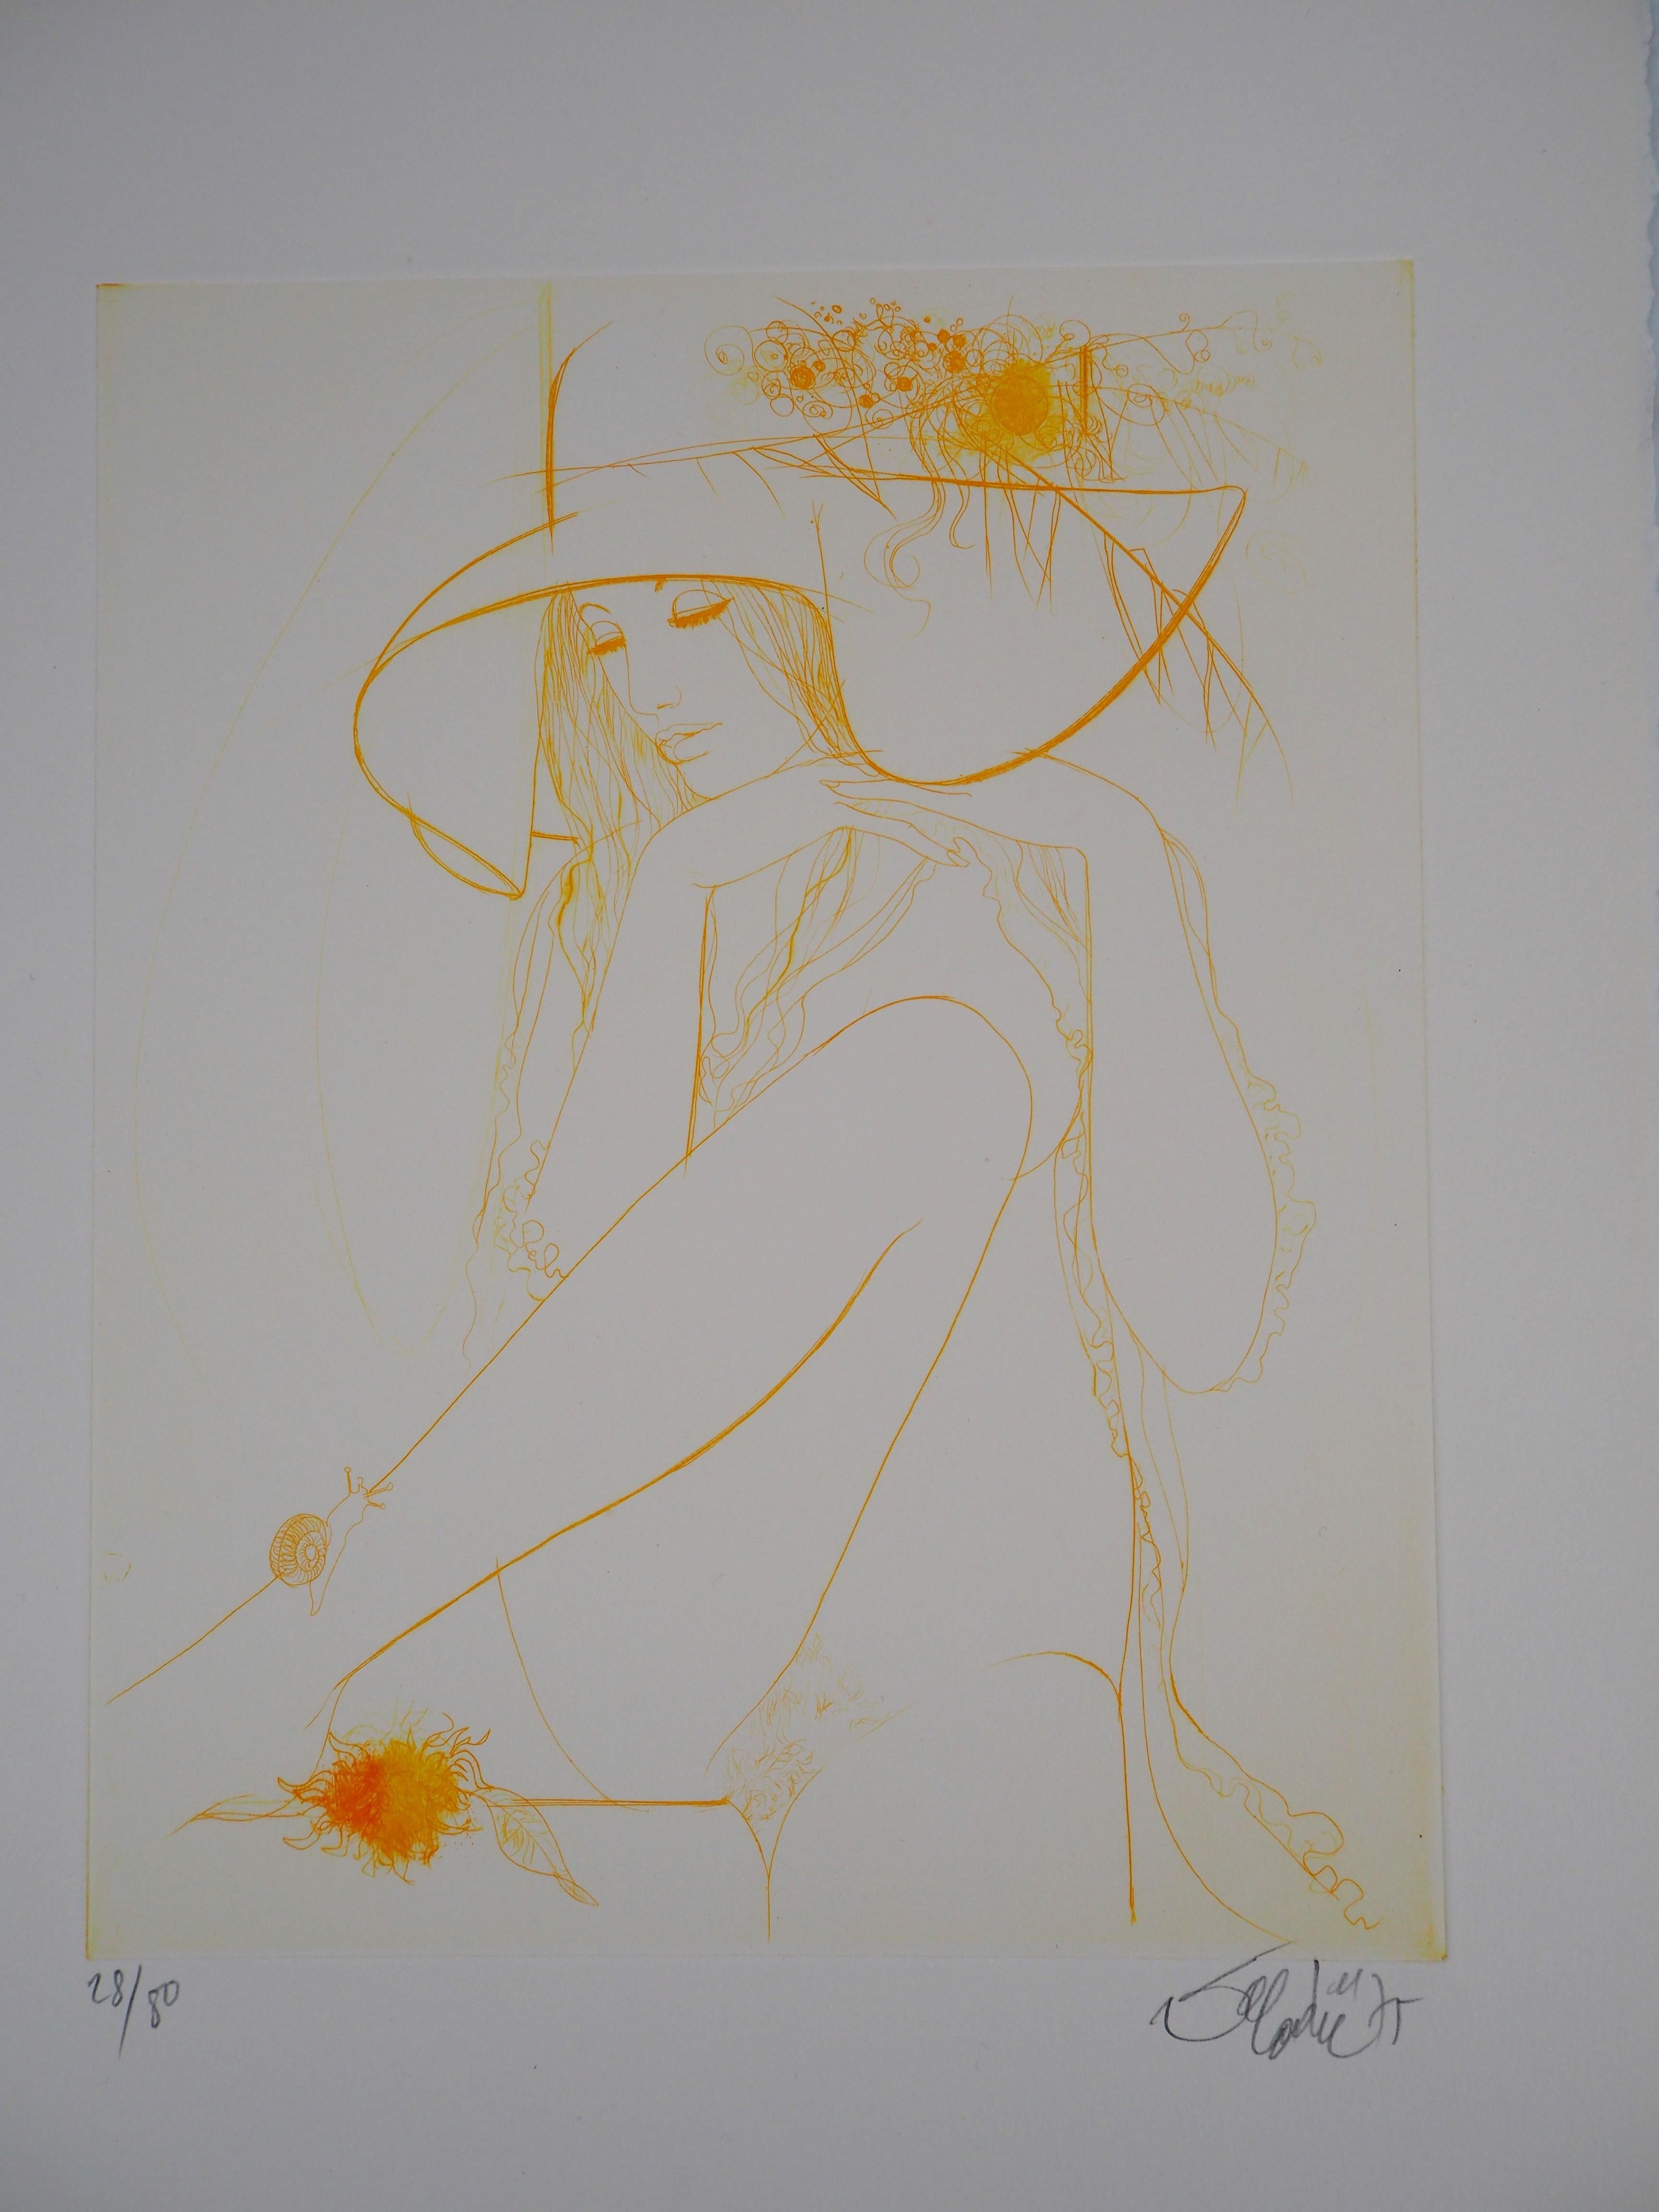 Fall : Women with a Hat - Original Etching, Handsigned - Modern Print by Jean-Baptiste Valadie